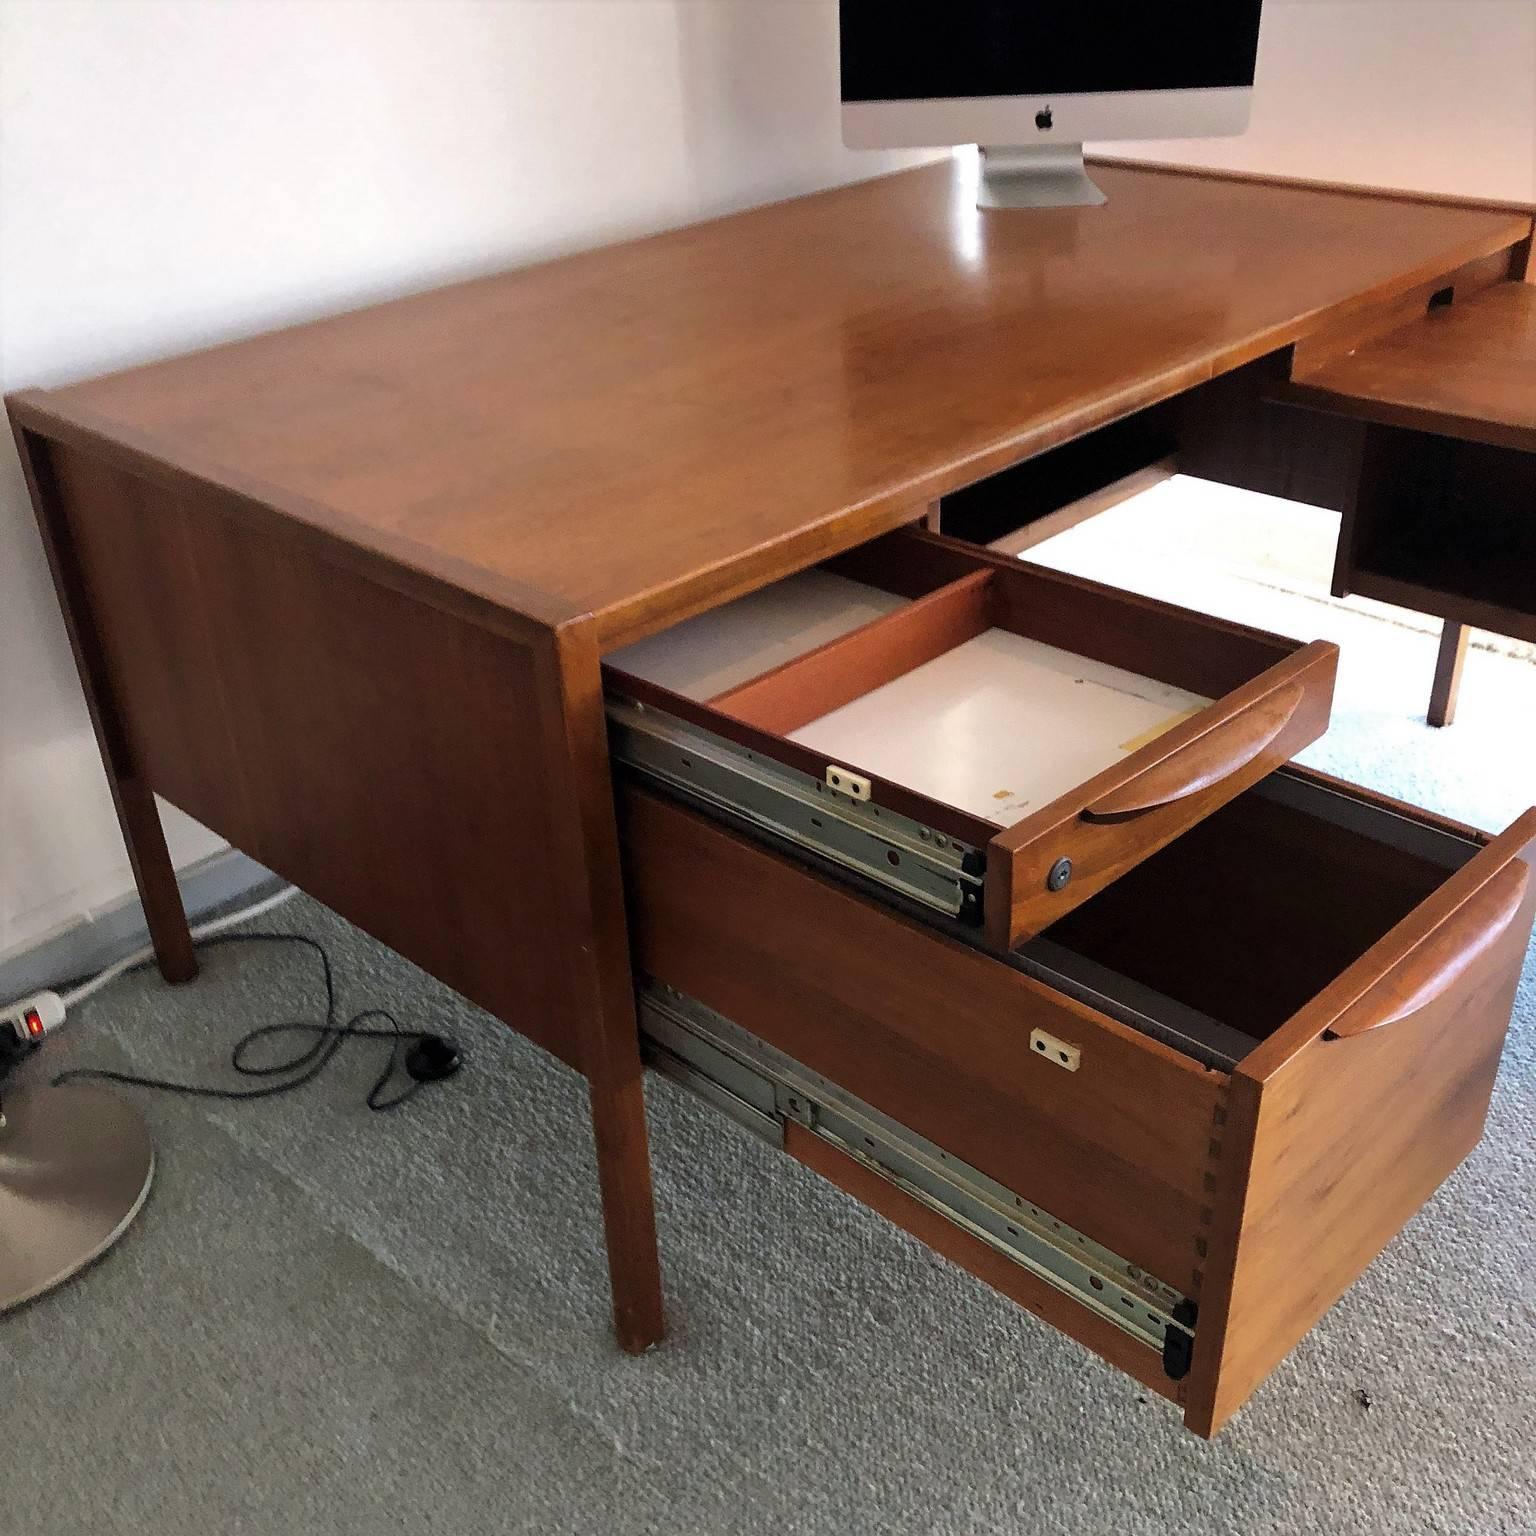 Carved Mid-Century Modern Desk with a Side Extension by Jens Risom